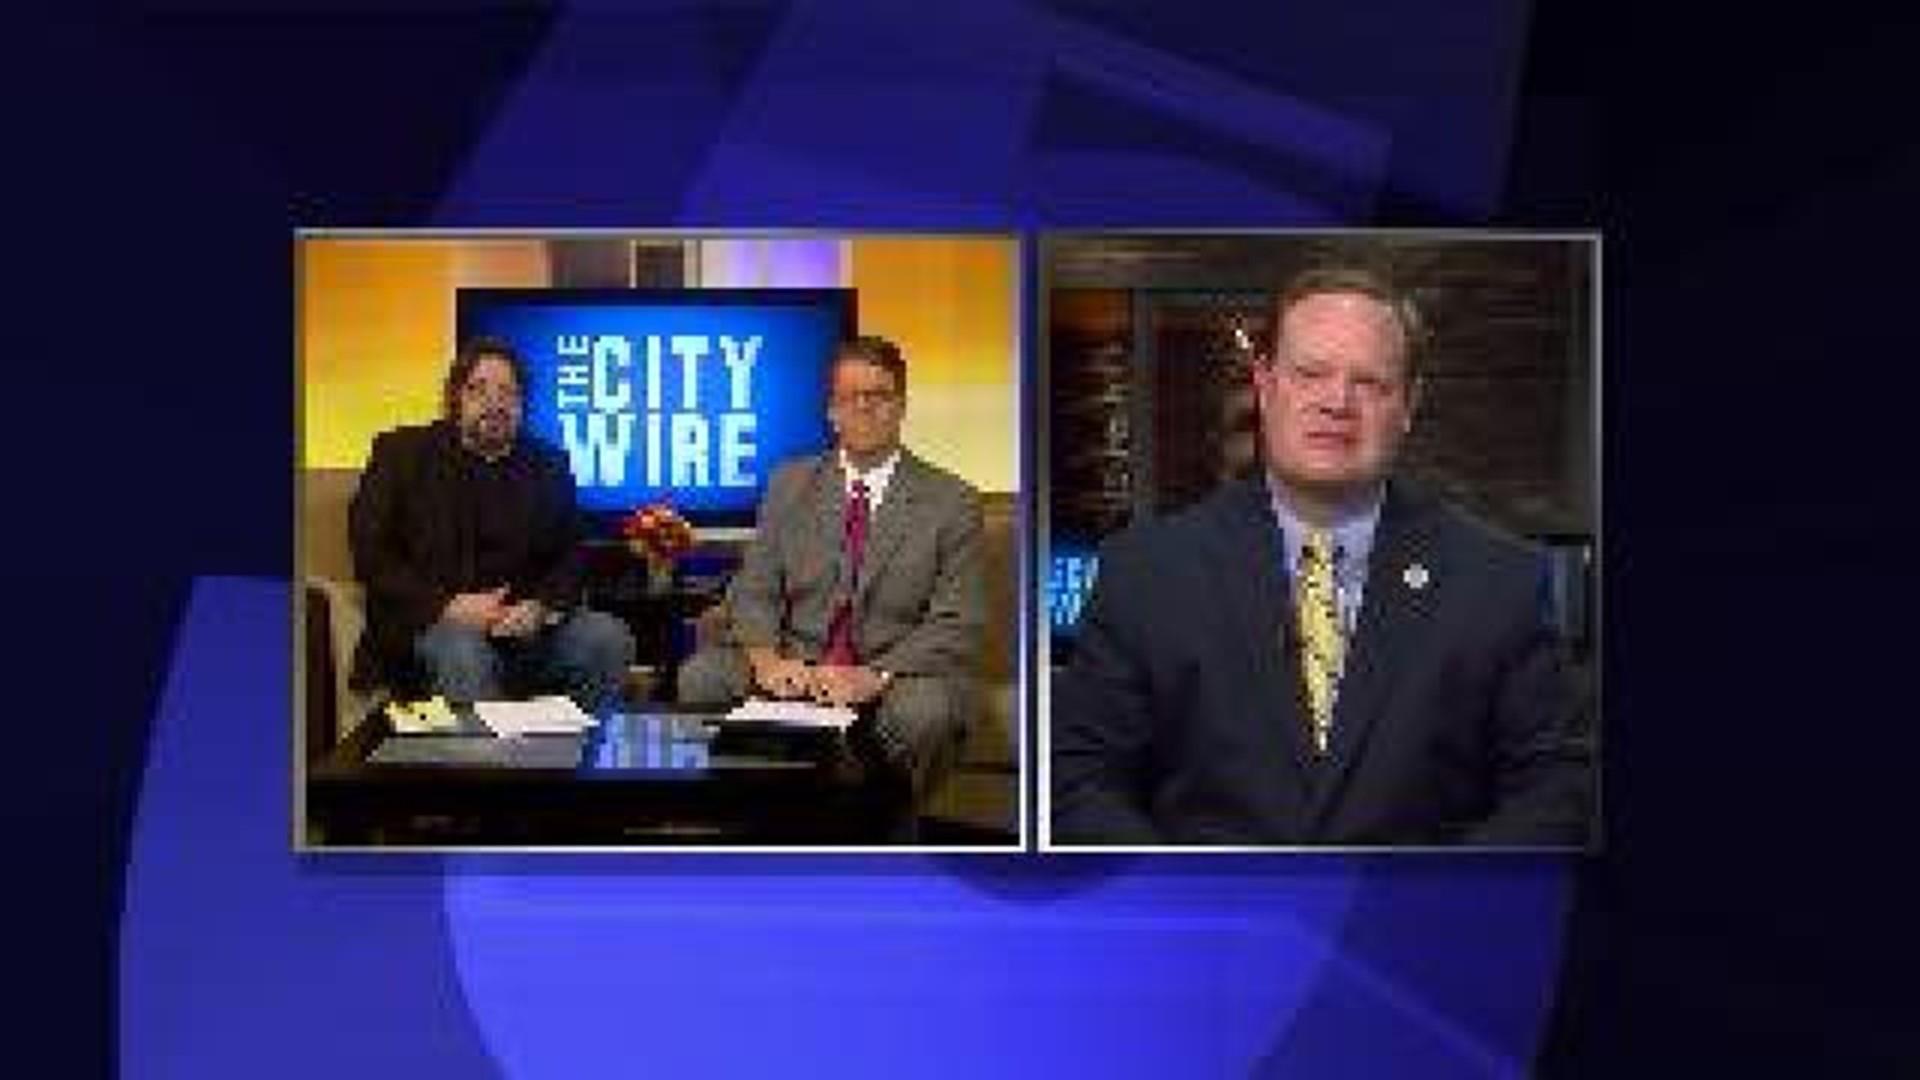 Rogers Mayor on The City Wire